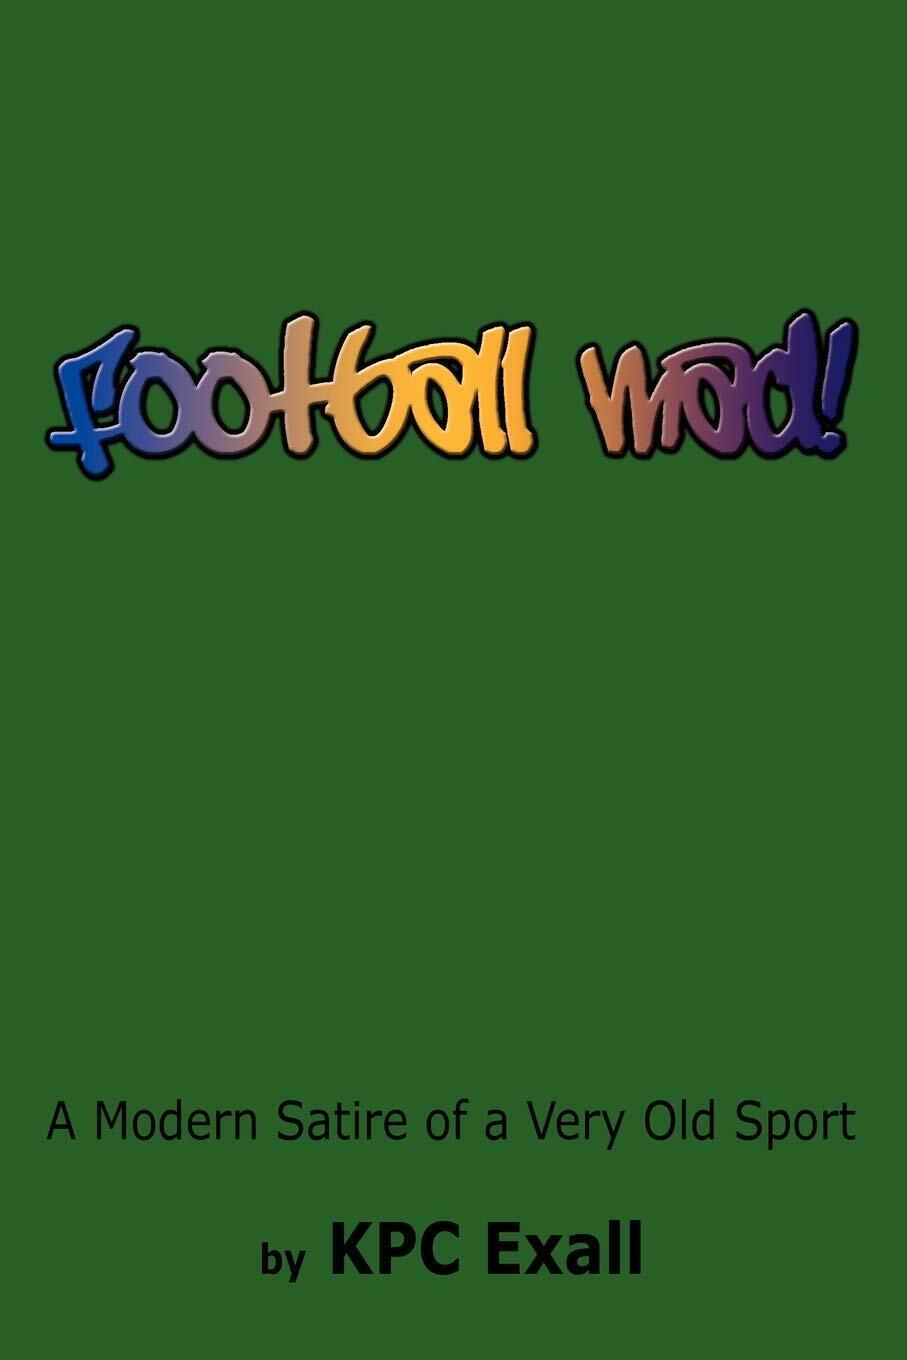 Football Mad!: A Modern Satire of a Very Old Sport - Kpc Exall -AUTHORHOUSE,2008